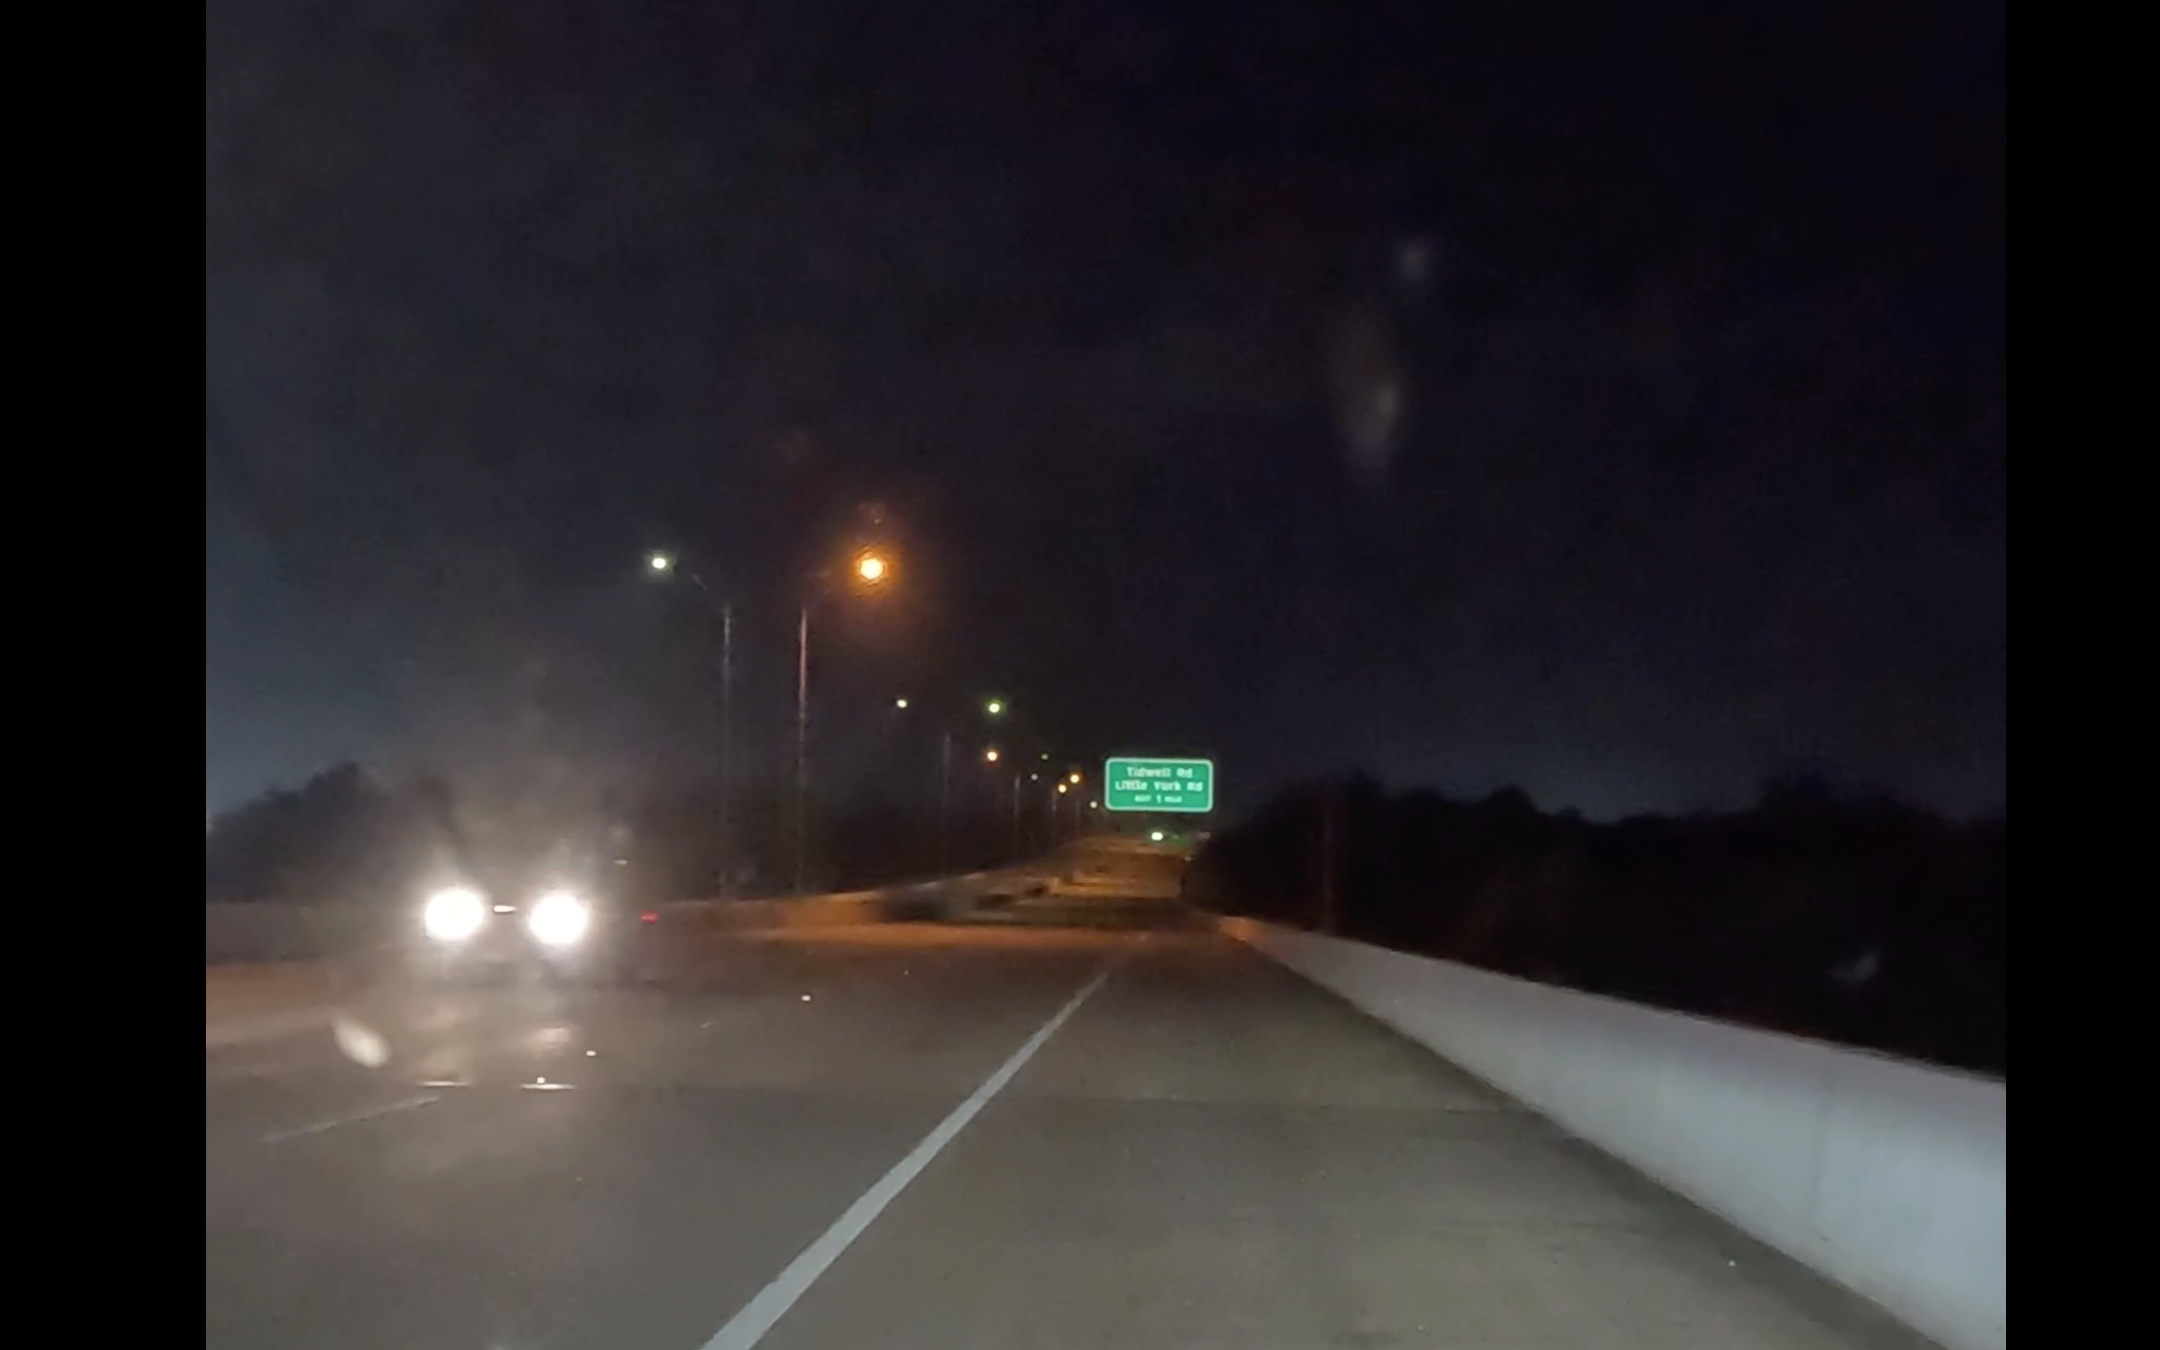 A wrong way driver was spotted on the Beltway 8 @ Tidwell on June 13, 2022